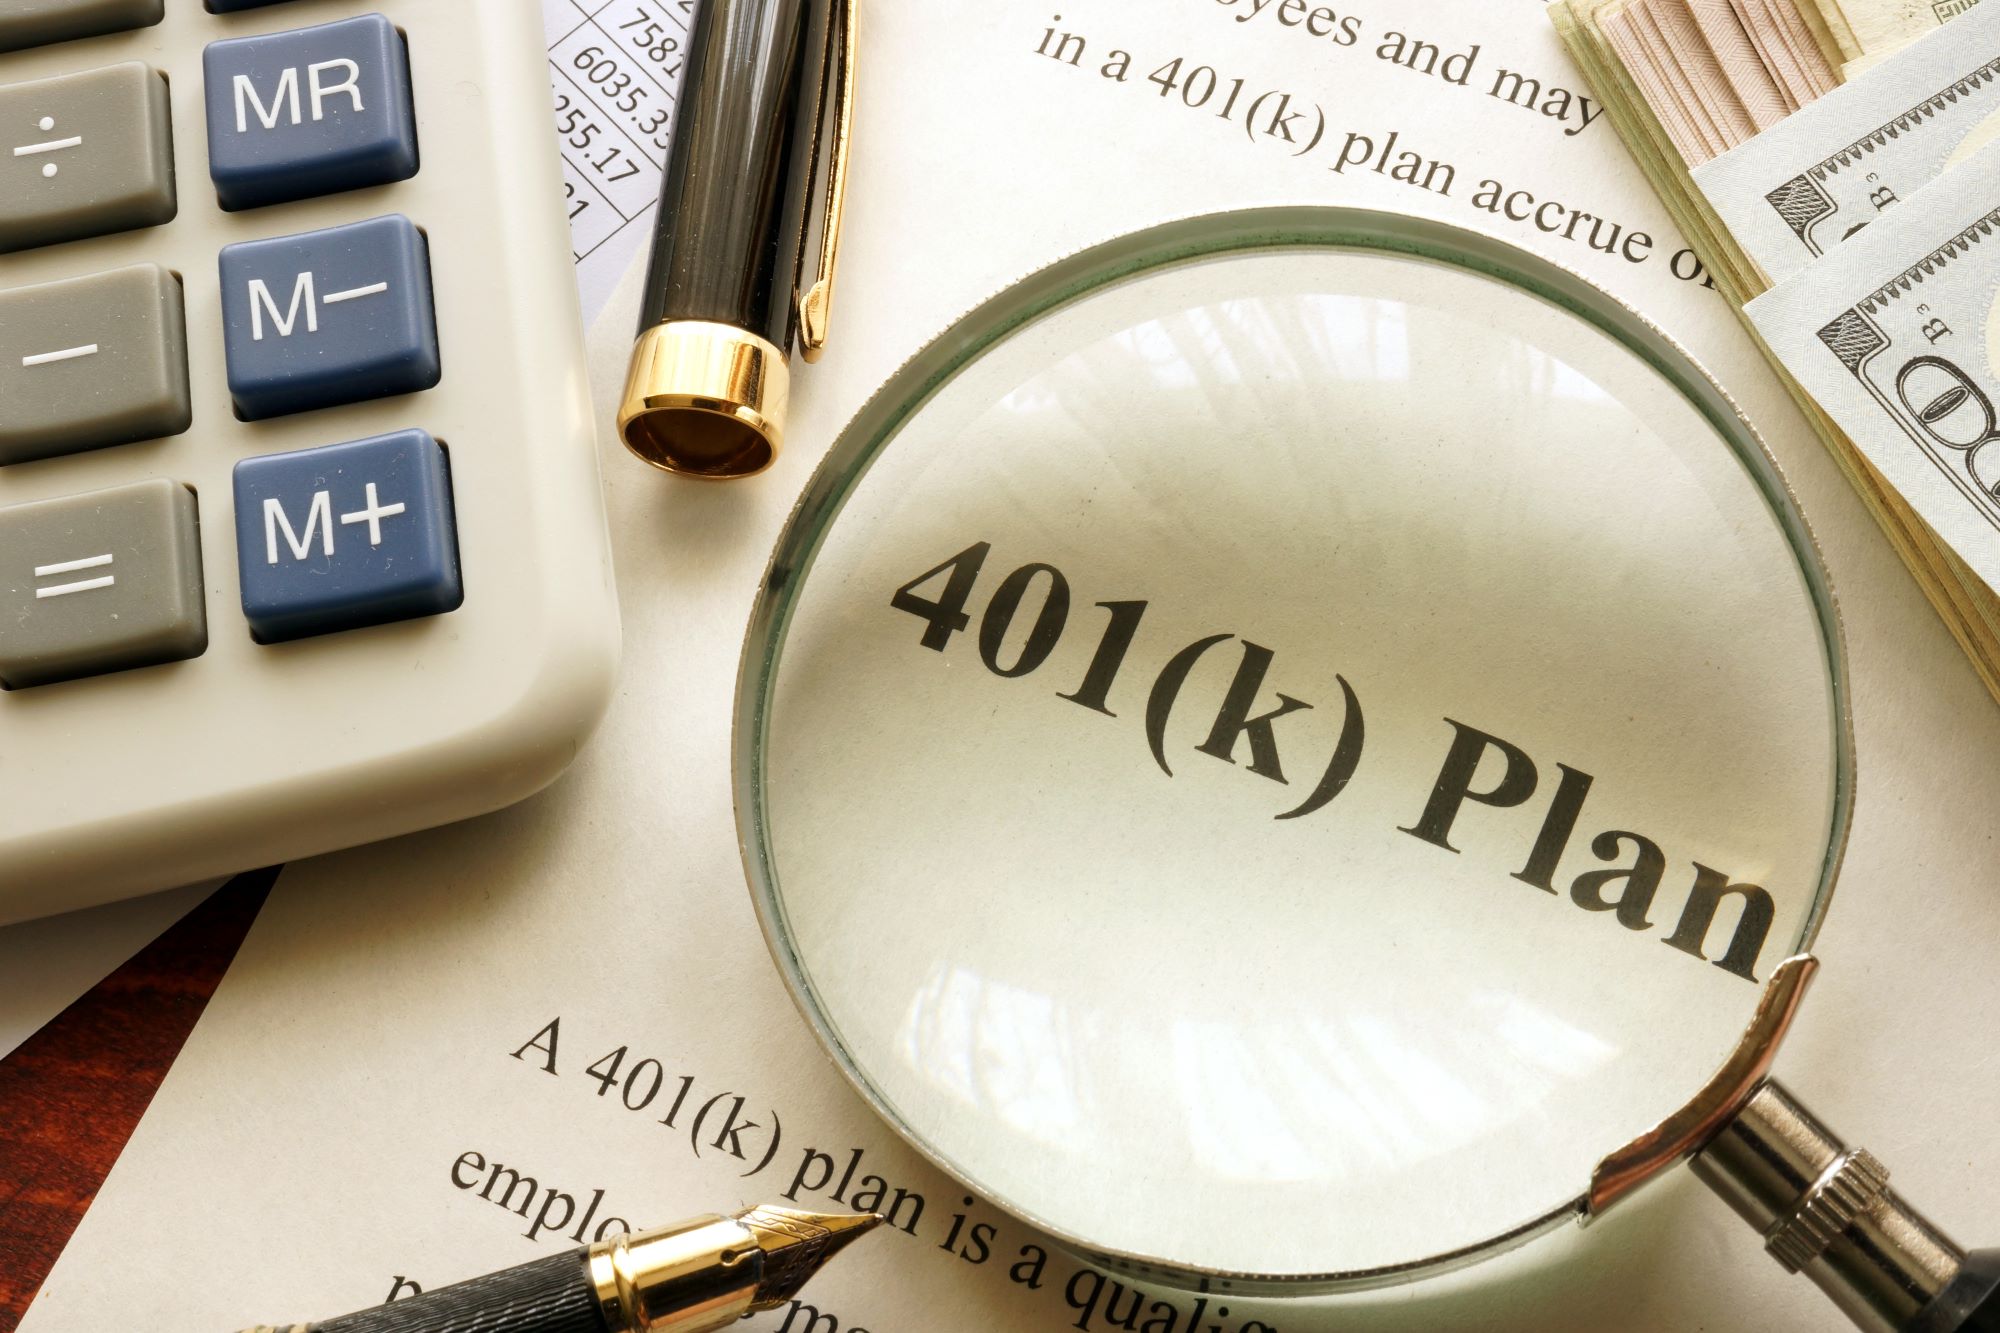 How to Find an Old 401(k)